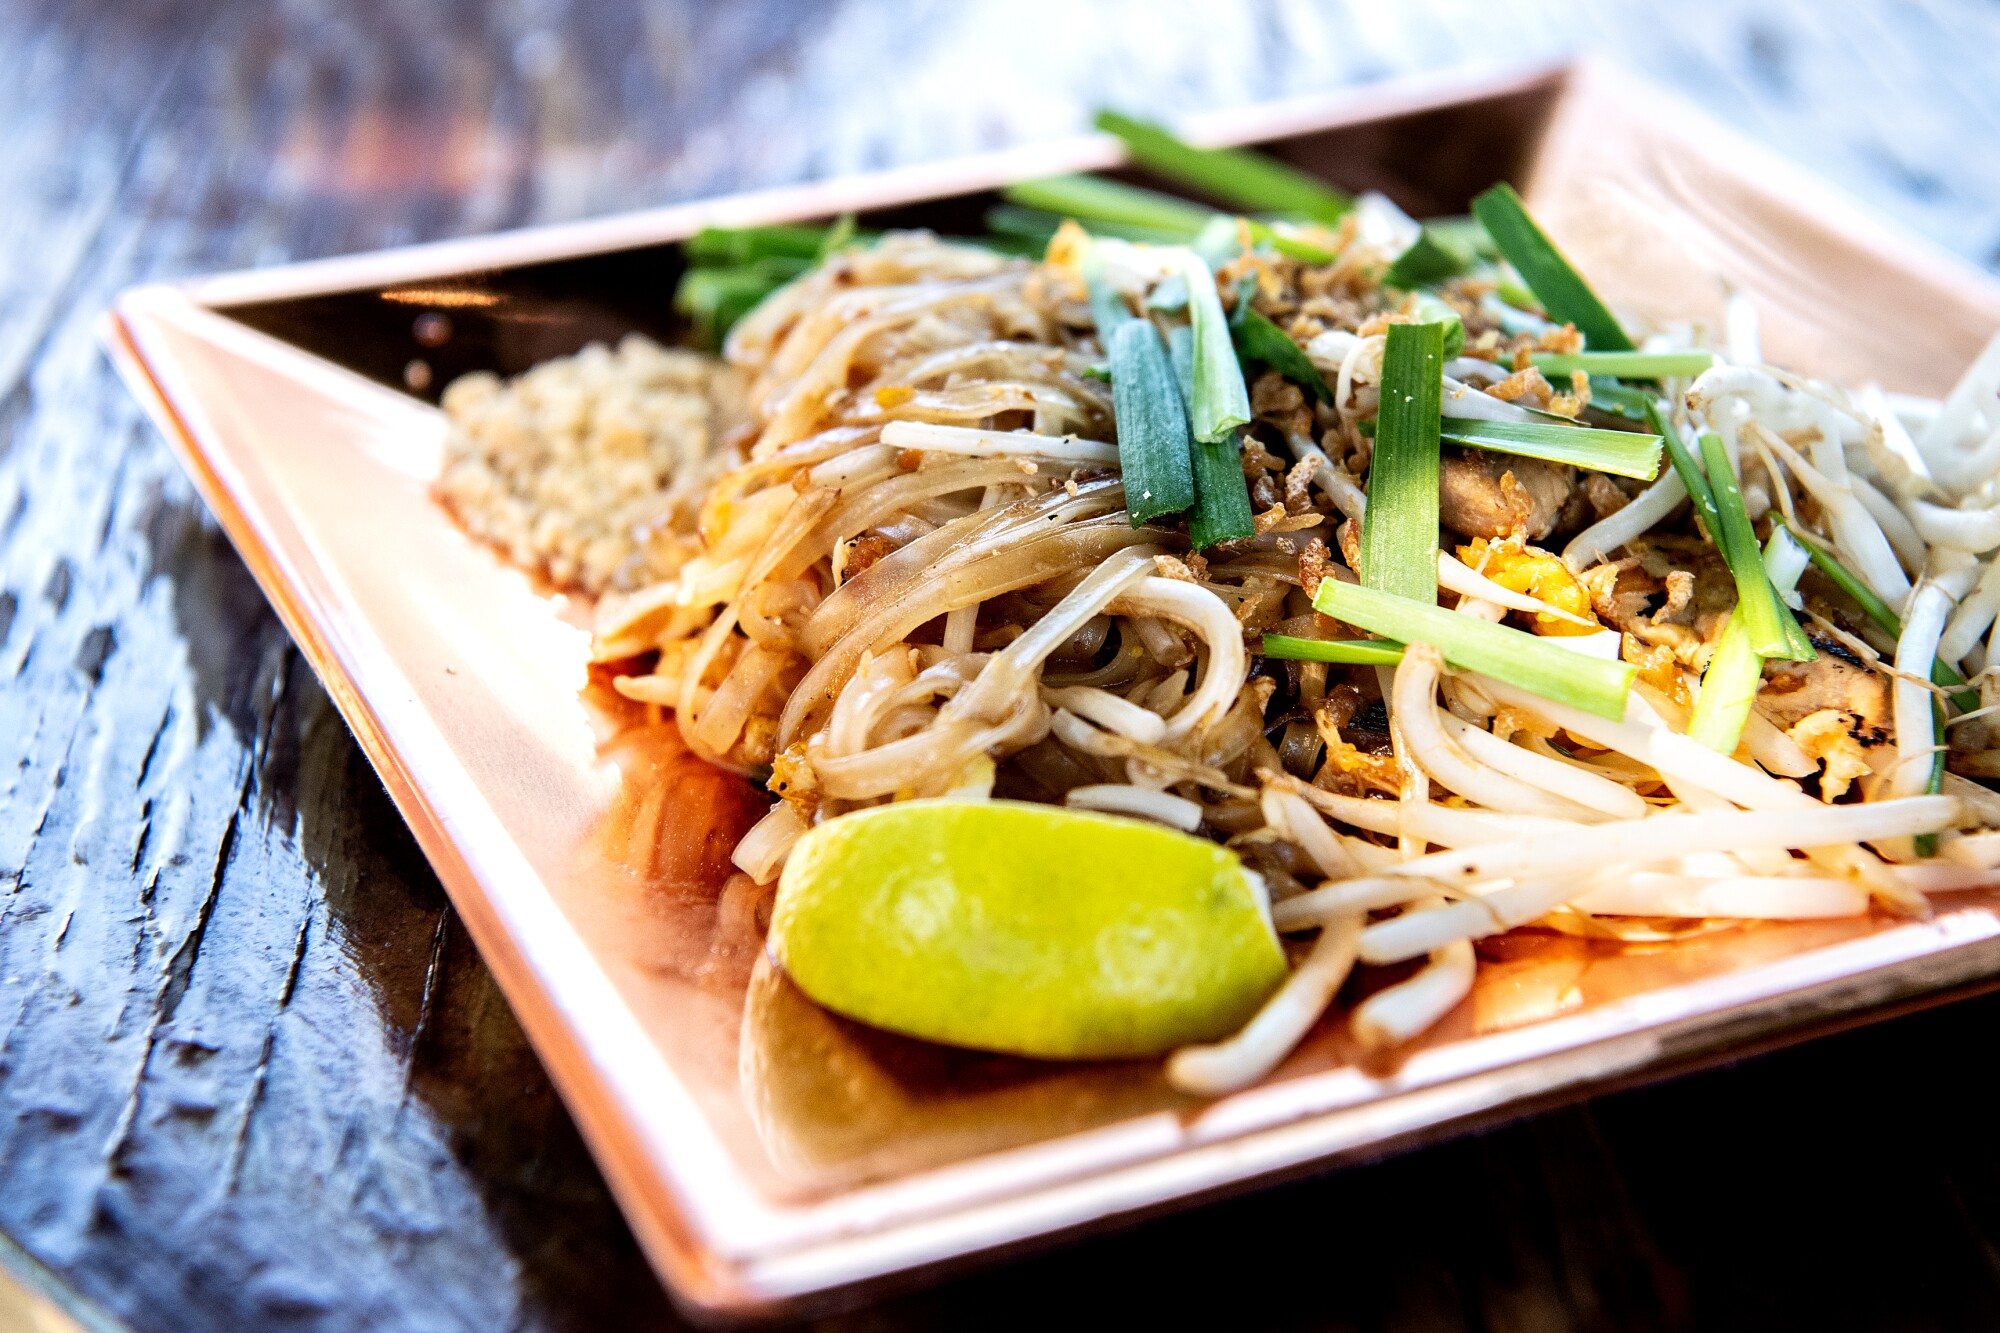 A square tray contains pad thai.